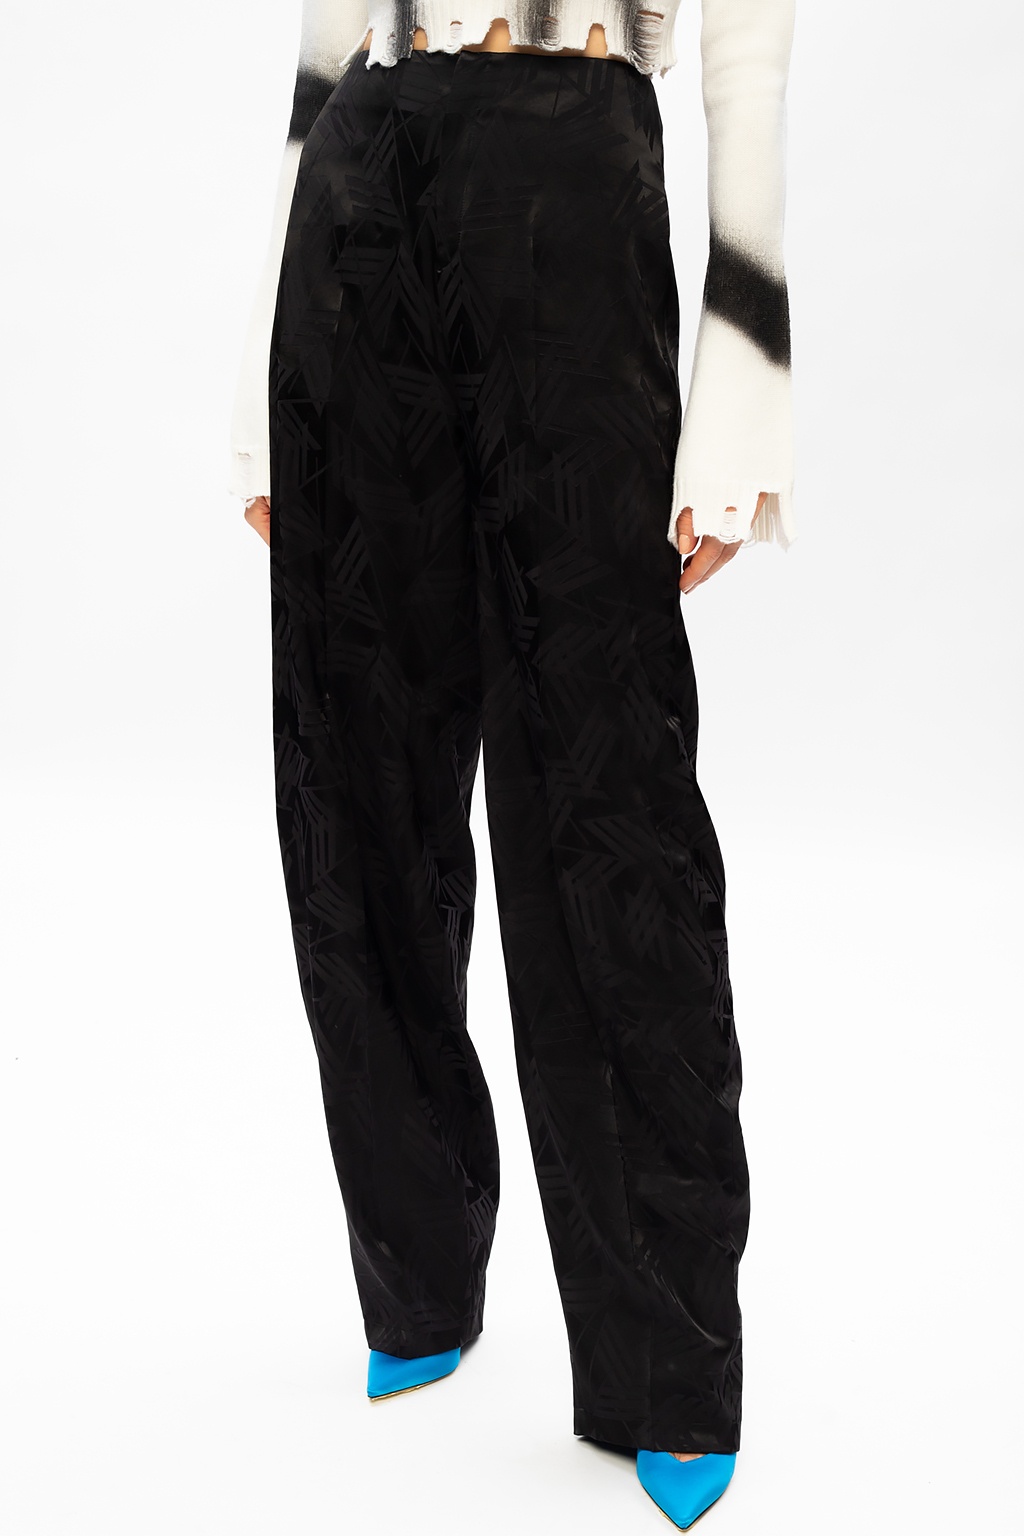 The Attico Patterned high-waisted trousers